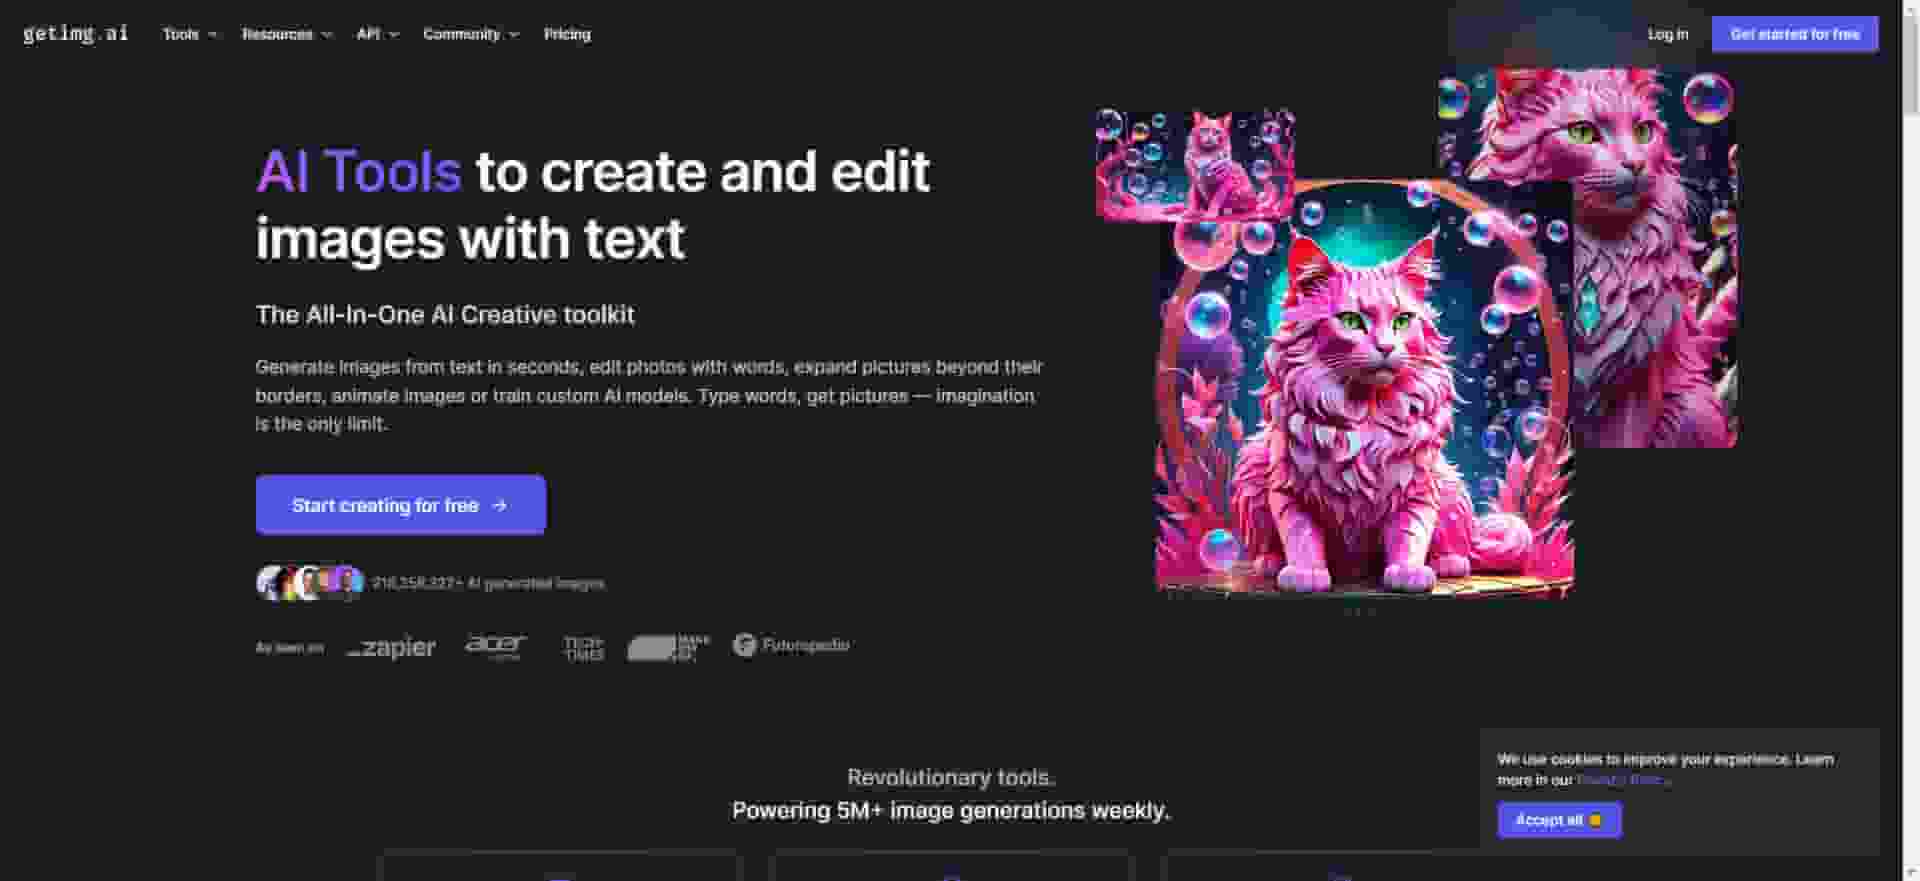 GetImg AI - Harness the innovative power of AI at GetImg.ai to transform text into striking images. This all-encompassing creative toolkit assists in generating, editing, and animating images with minimal effort.